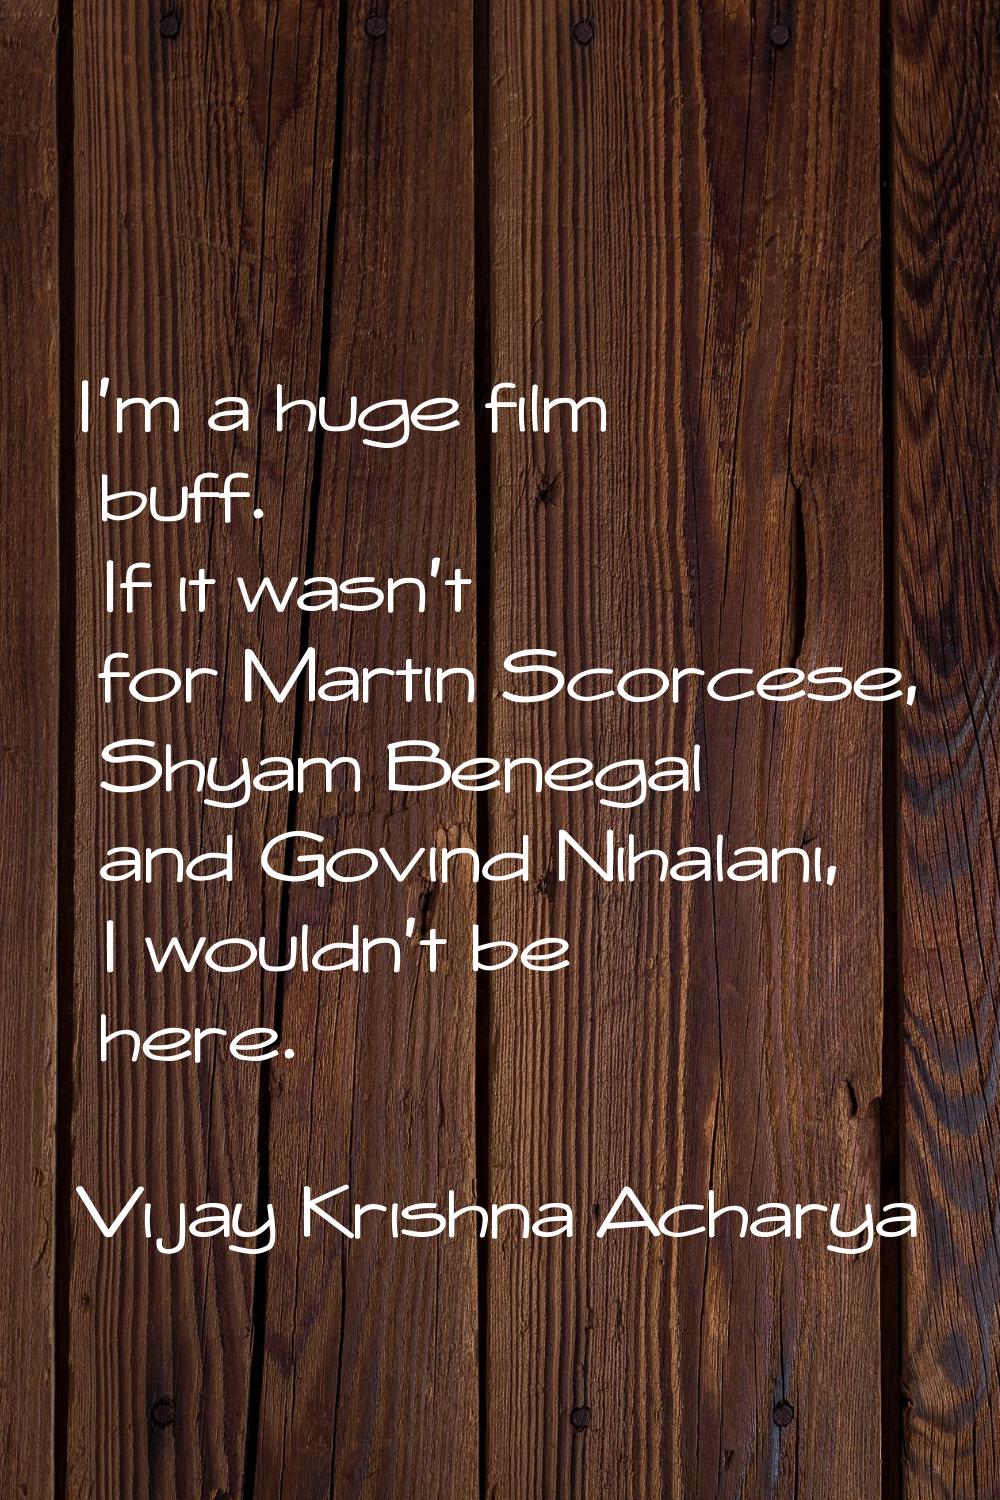 I'm a huge film buff. If it wasn't for Martin Scorcese, Shyam Benegal and Govind Nihalani, I wouldn